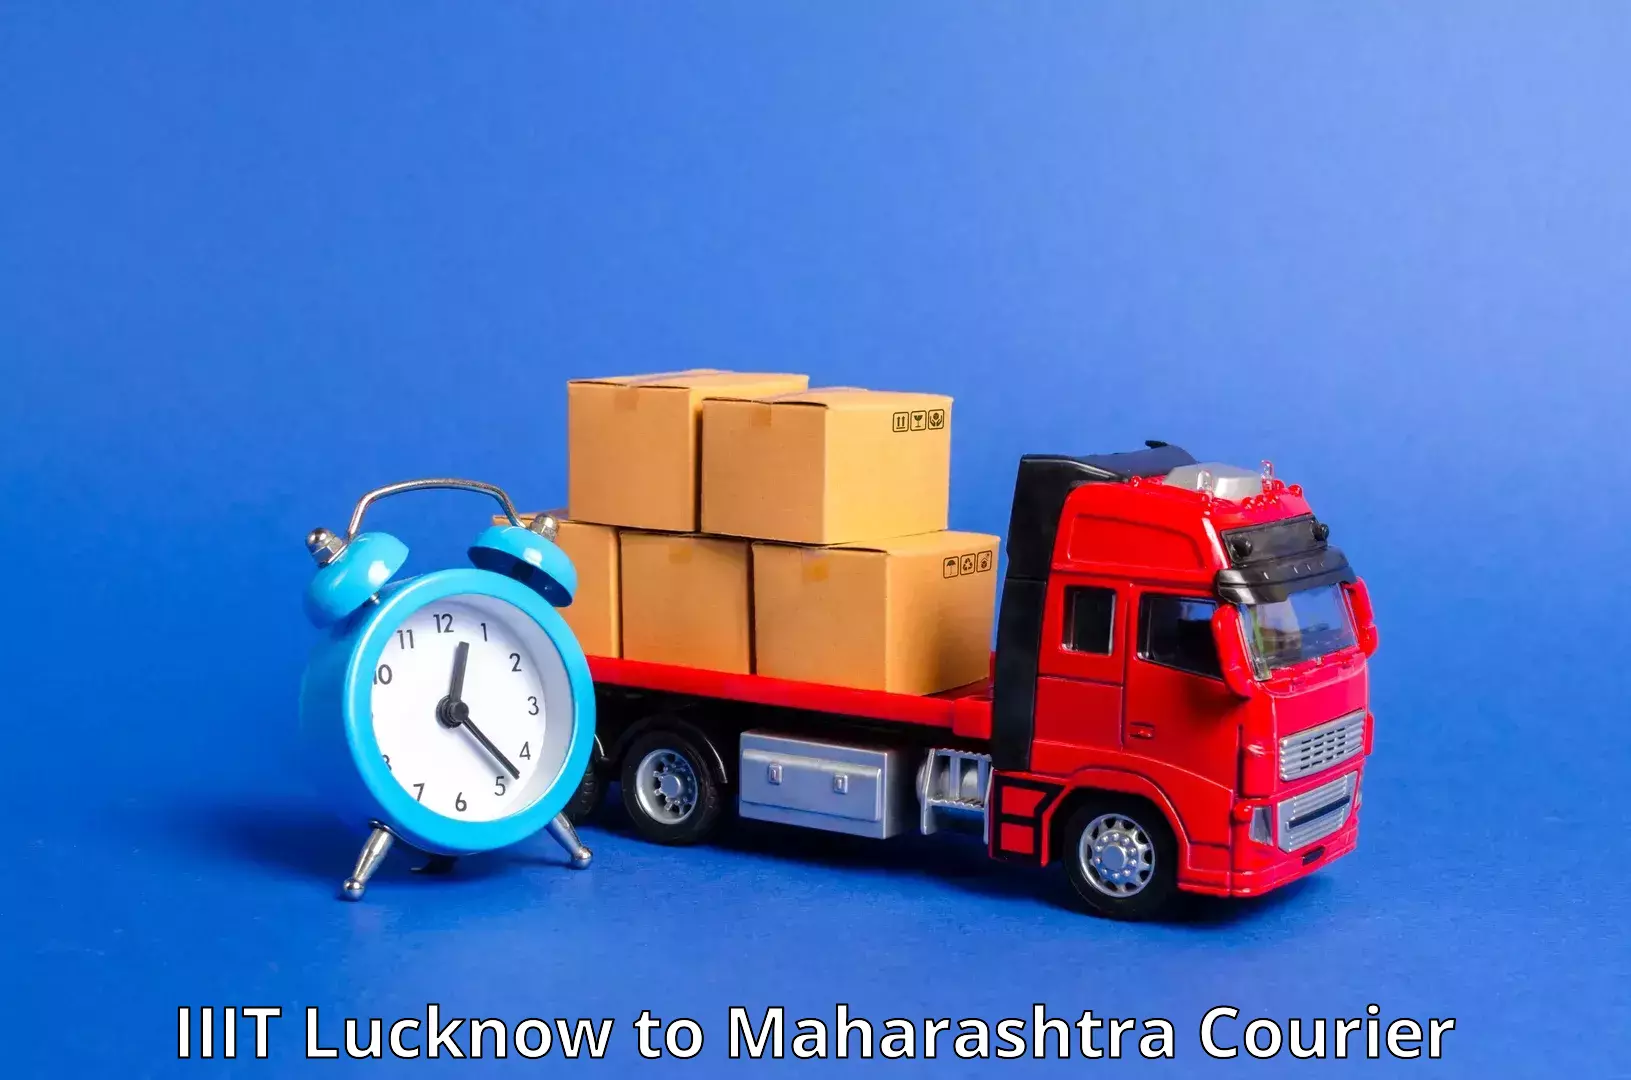 Punctual parcel services IIIT Lucknow to Maharashtra